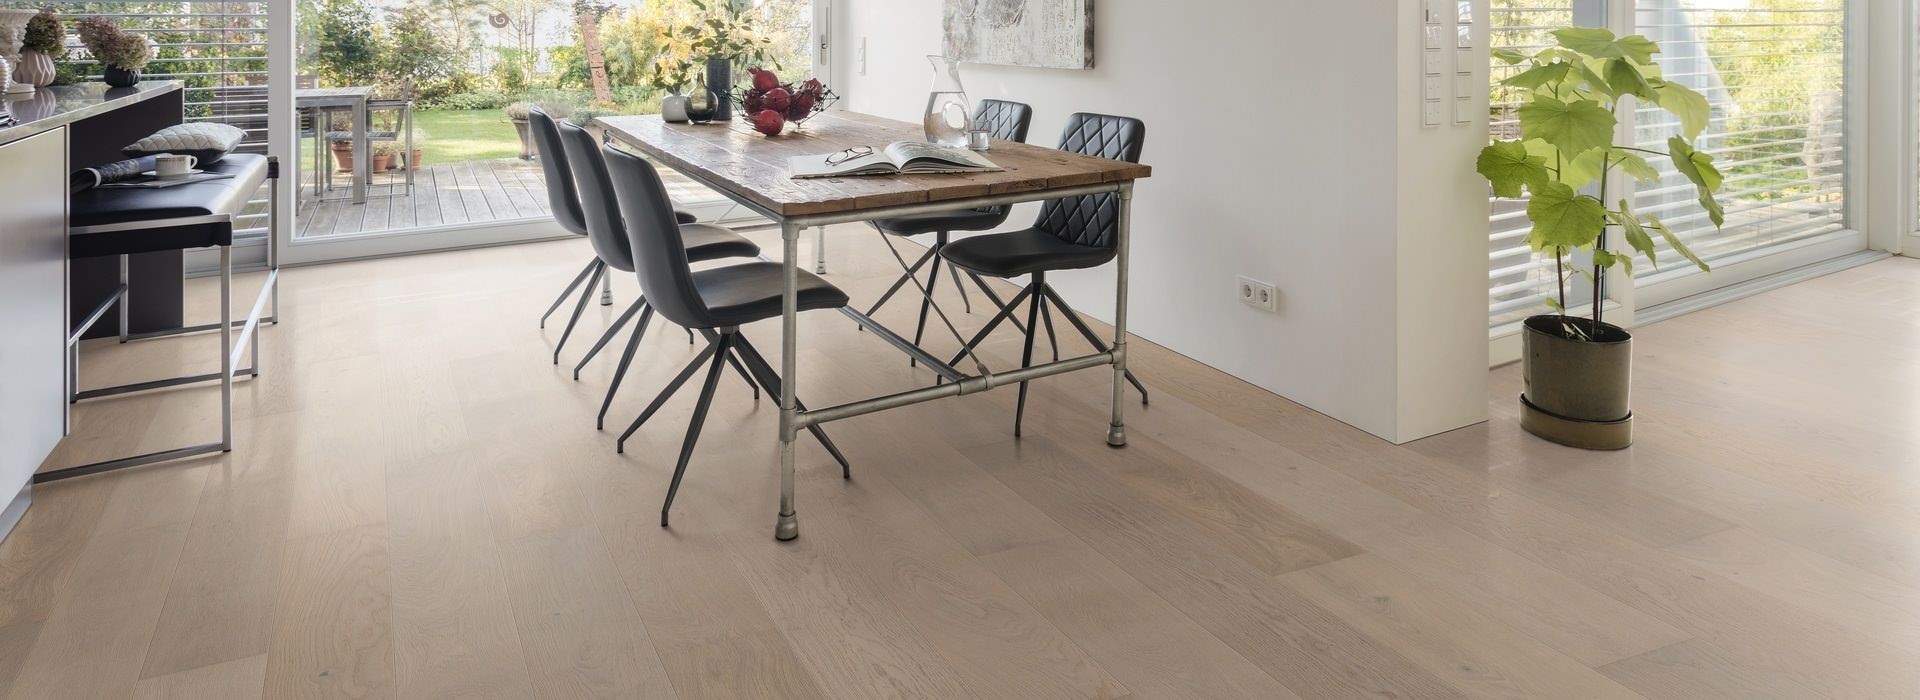 HARO PARQUET 4000 Plank 1-Strip 180 4V Oak Crystal White Markant brushed naturaLin plus Top Connect